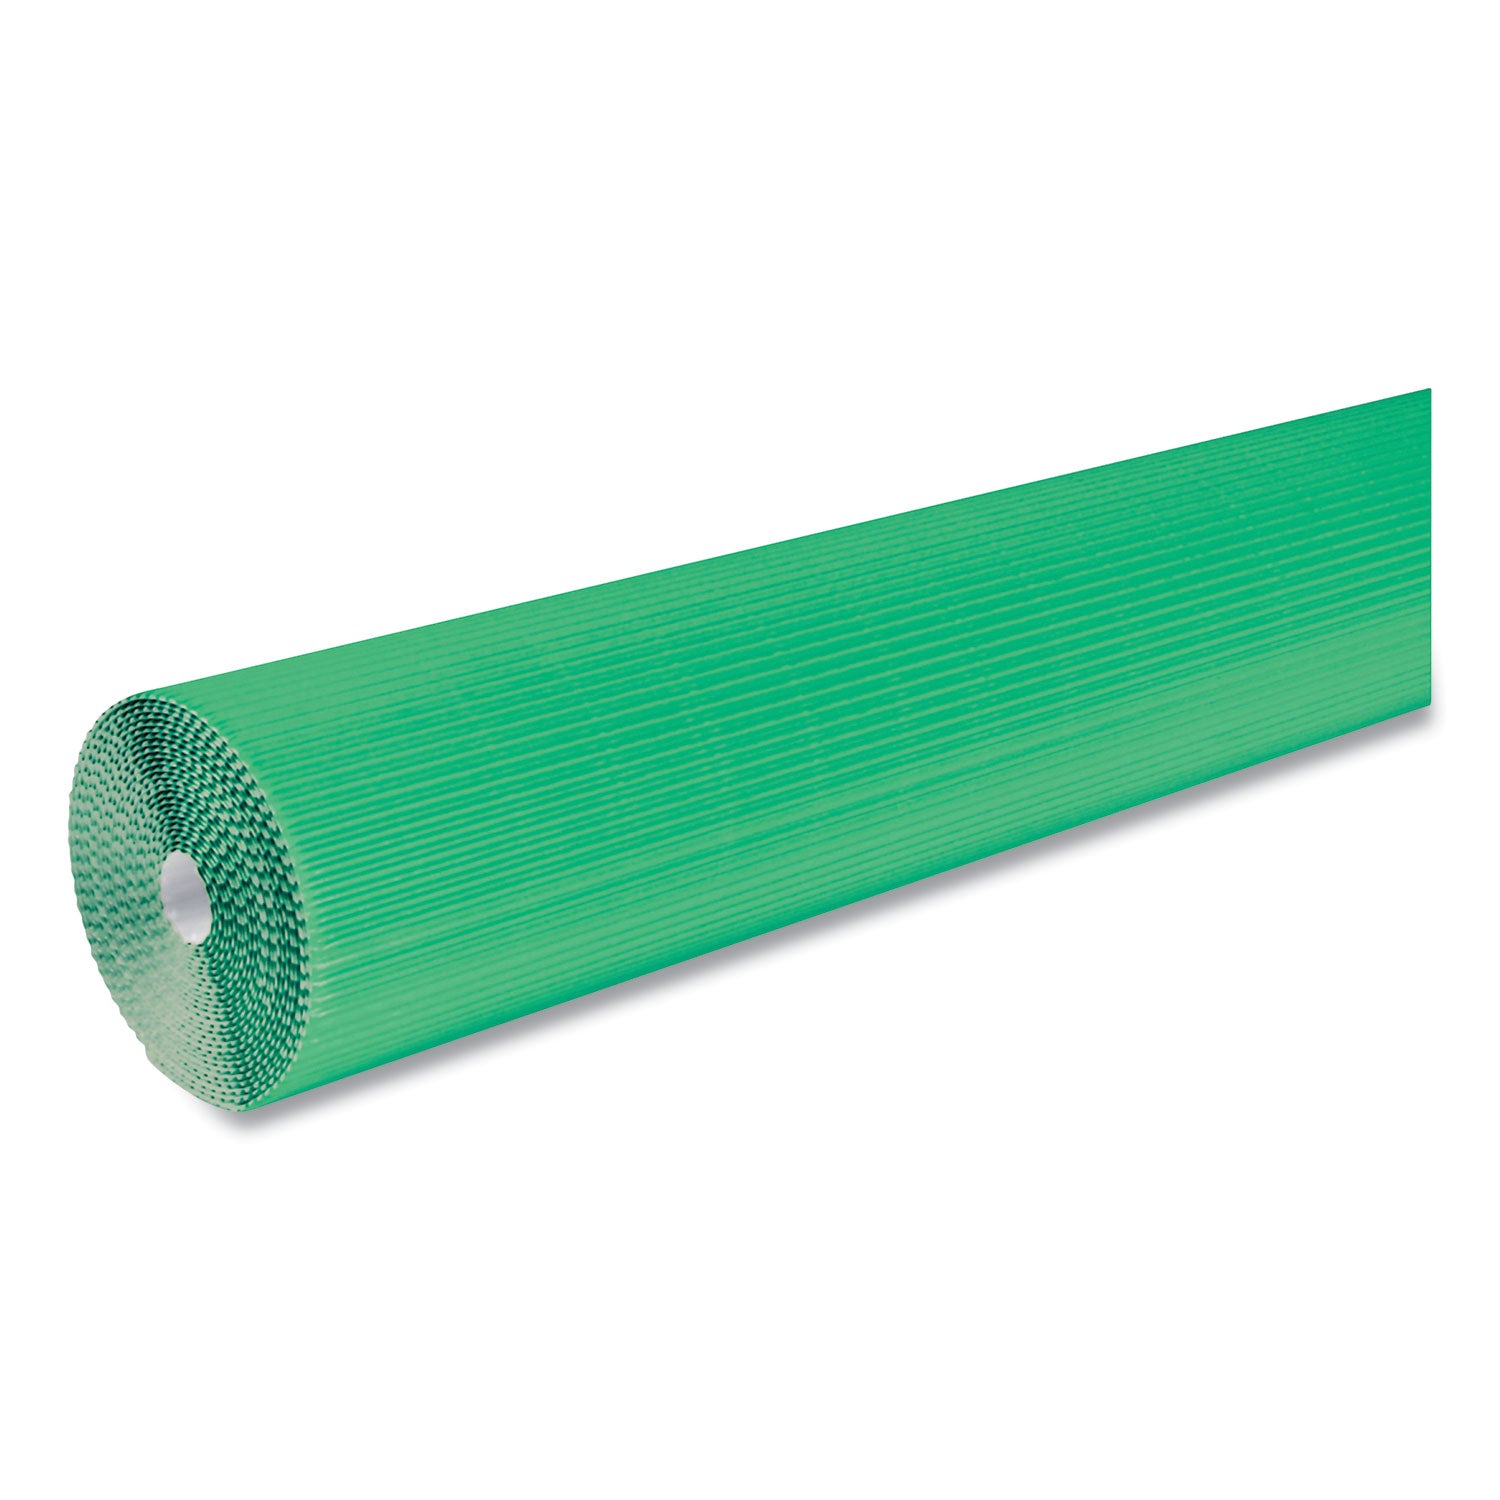 corobuff-corrugated-paper-roll-48-x-25-ft-emerald-green_pac0011141 - 2